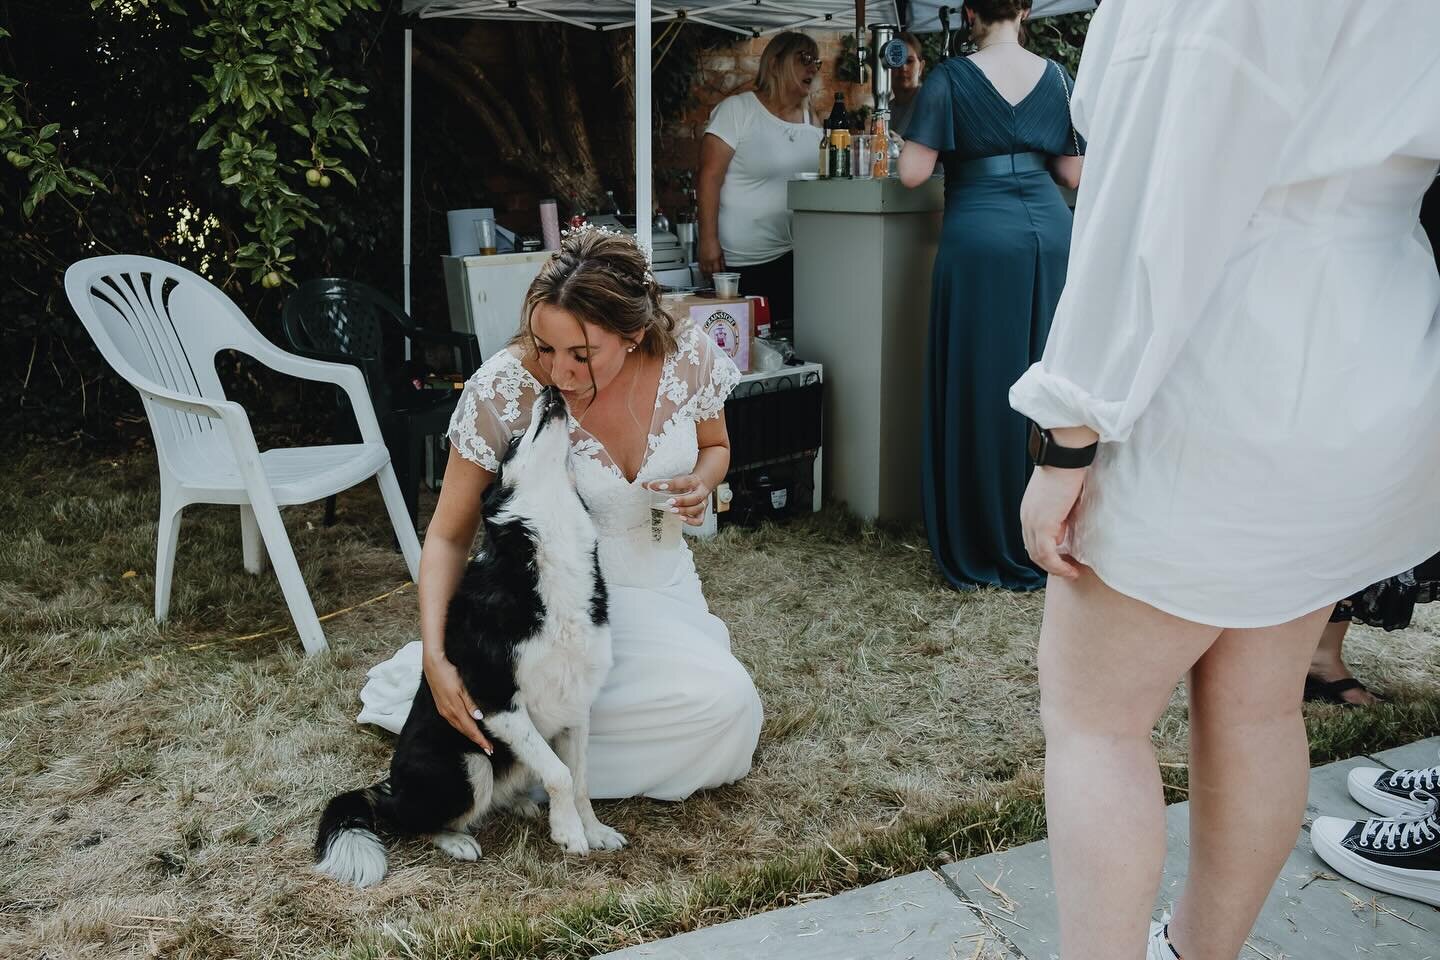 Let&rsquo;s talk dogs at weddings and being a dog owner myself, I love seeing dogs at weddings 🐕❤️. Not all dogs can attend weddings for a number reasons though. If my dog were able to attend my wedding, I would have him there in a heartbeat! 

If y